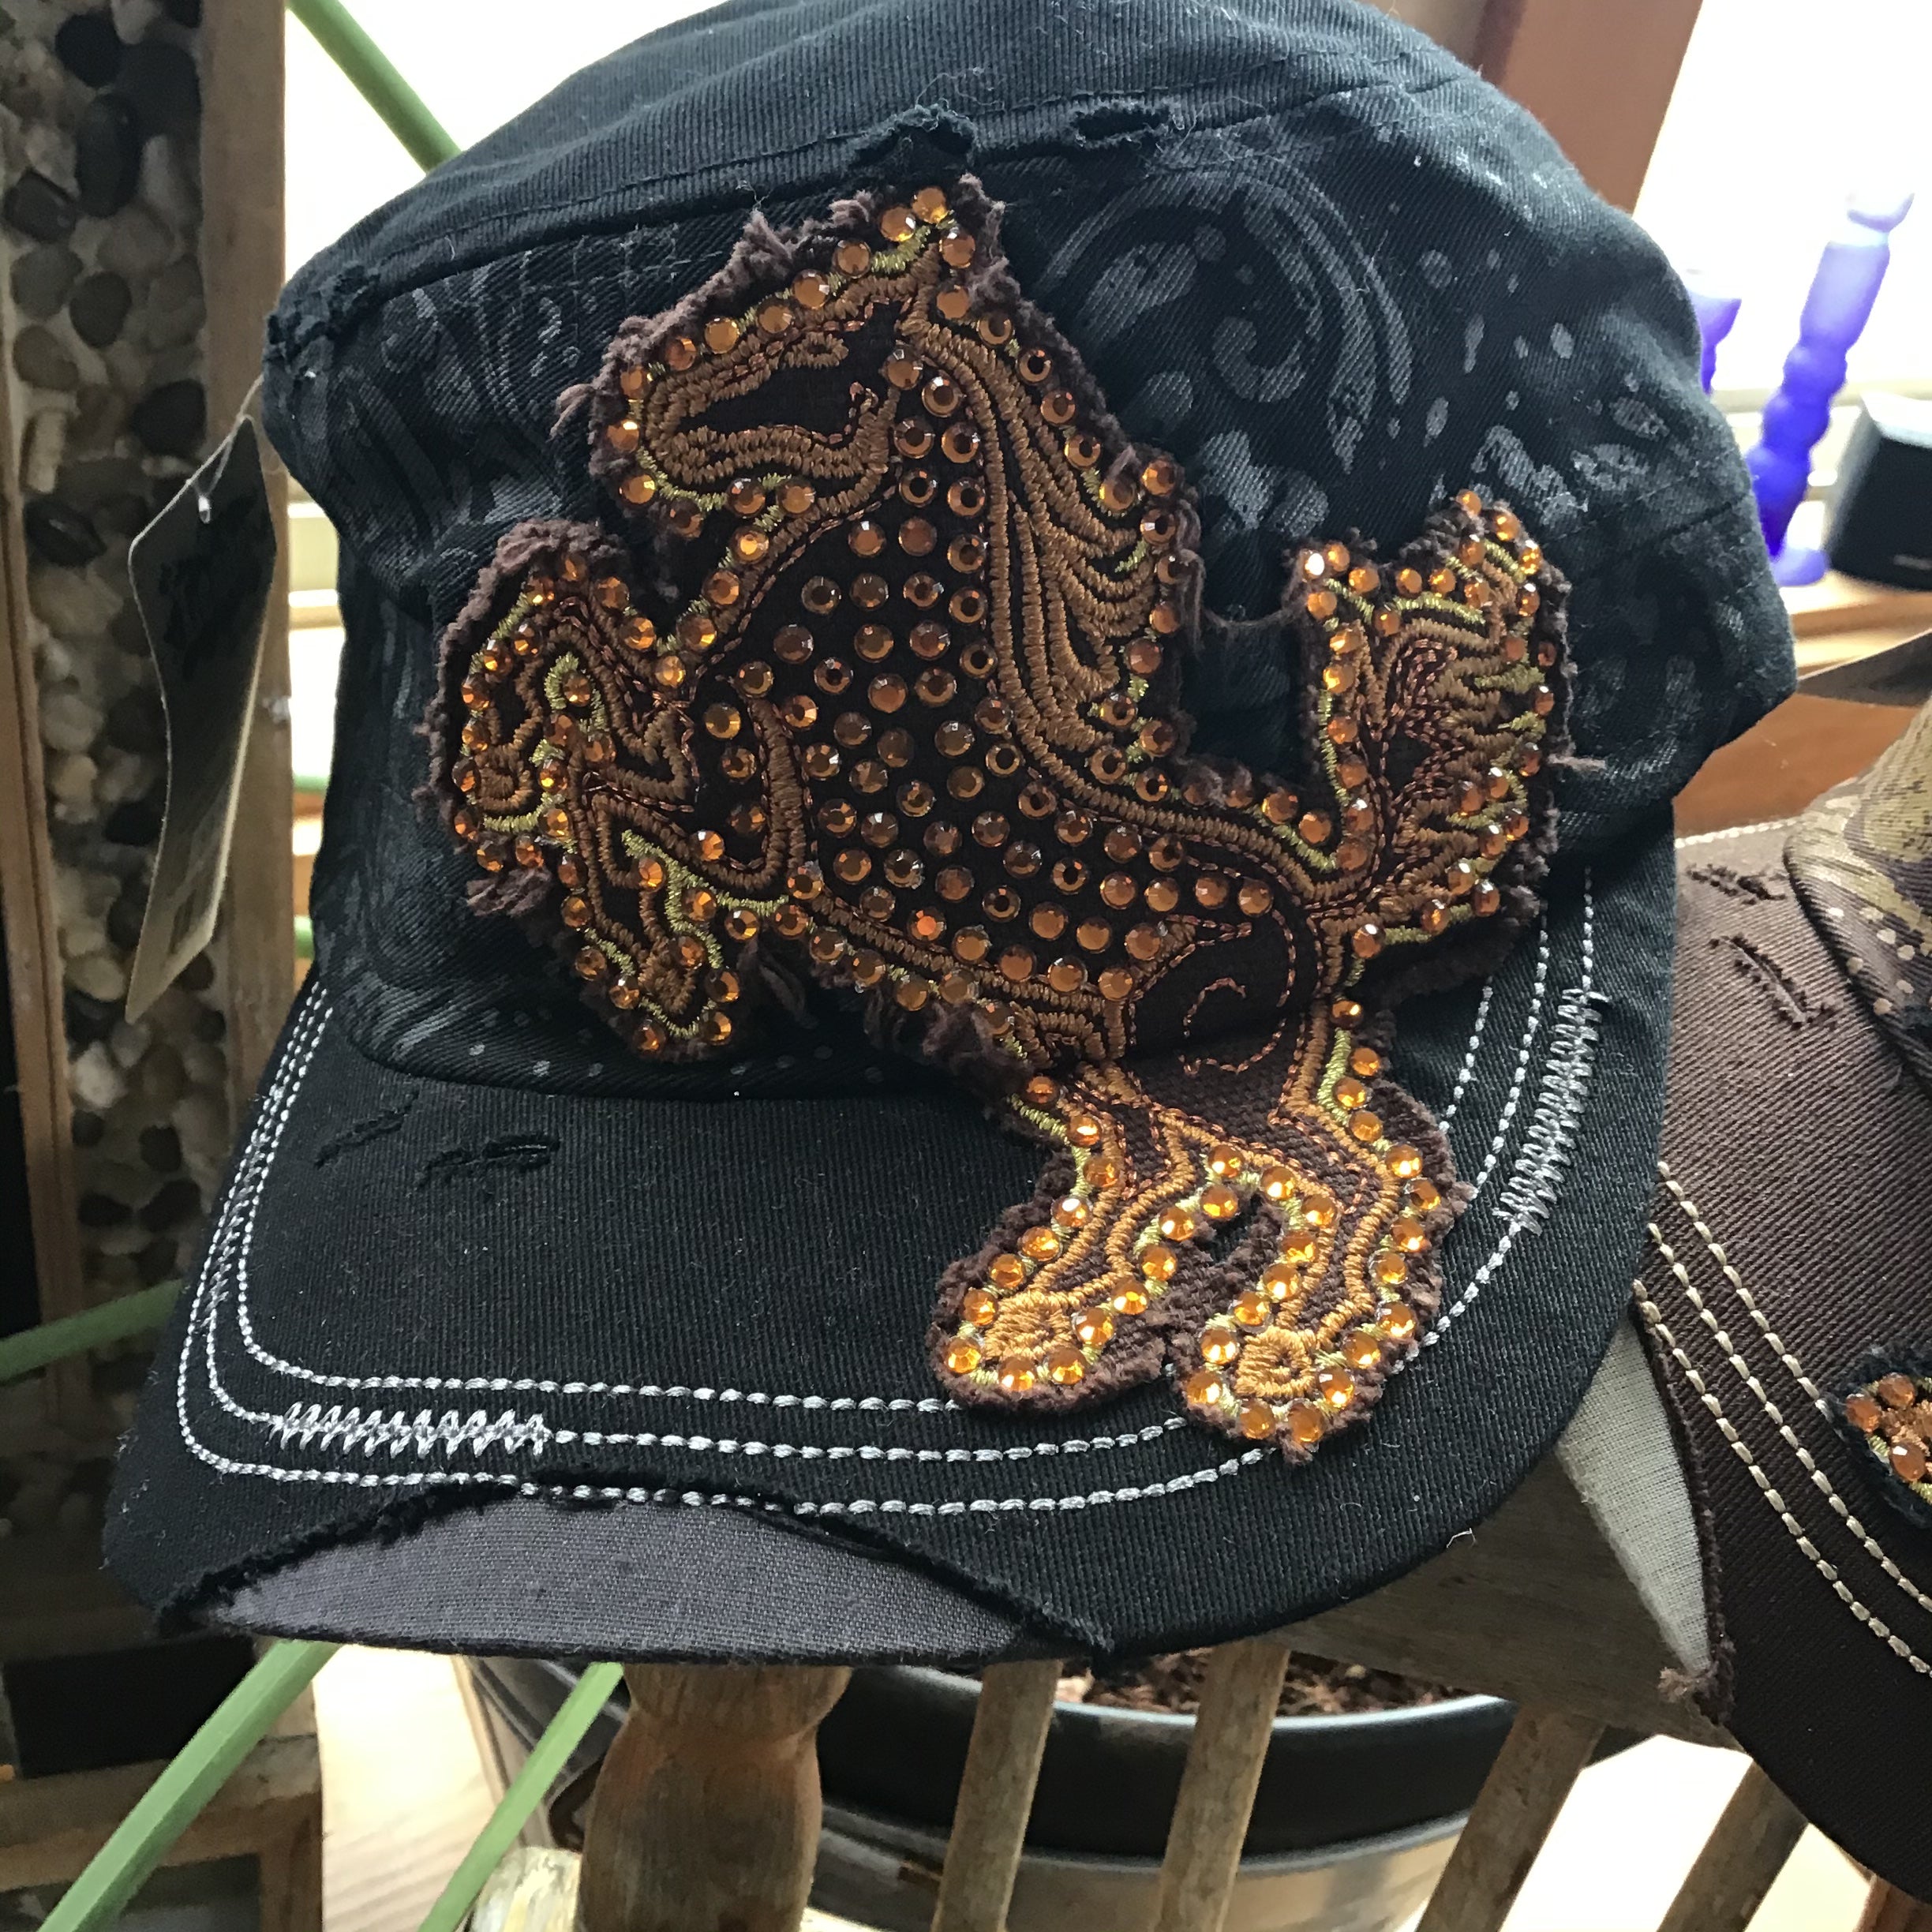 Mustang horse Cadet Ball hat with gorgeous bling distressed look